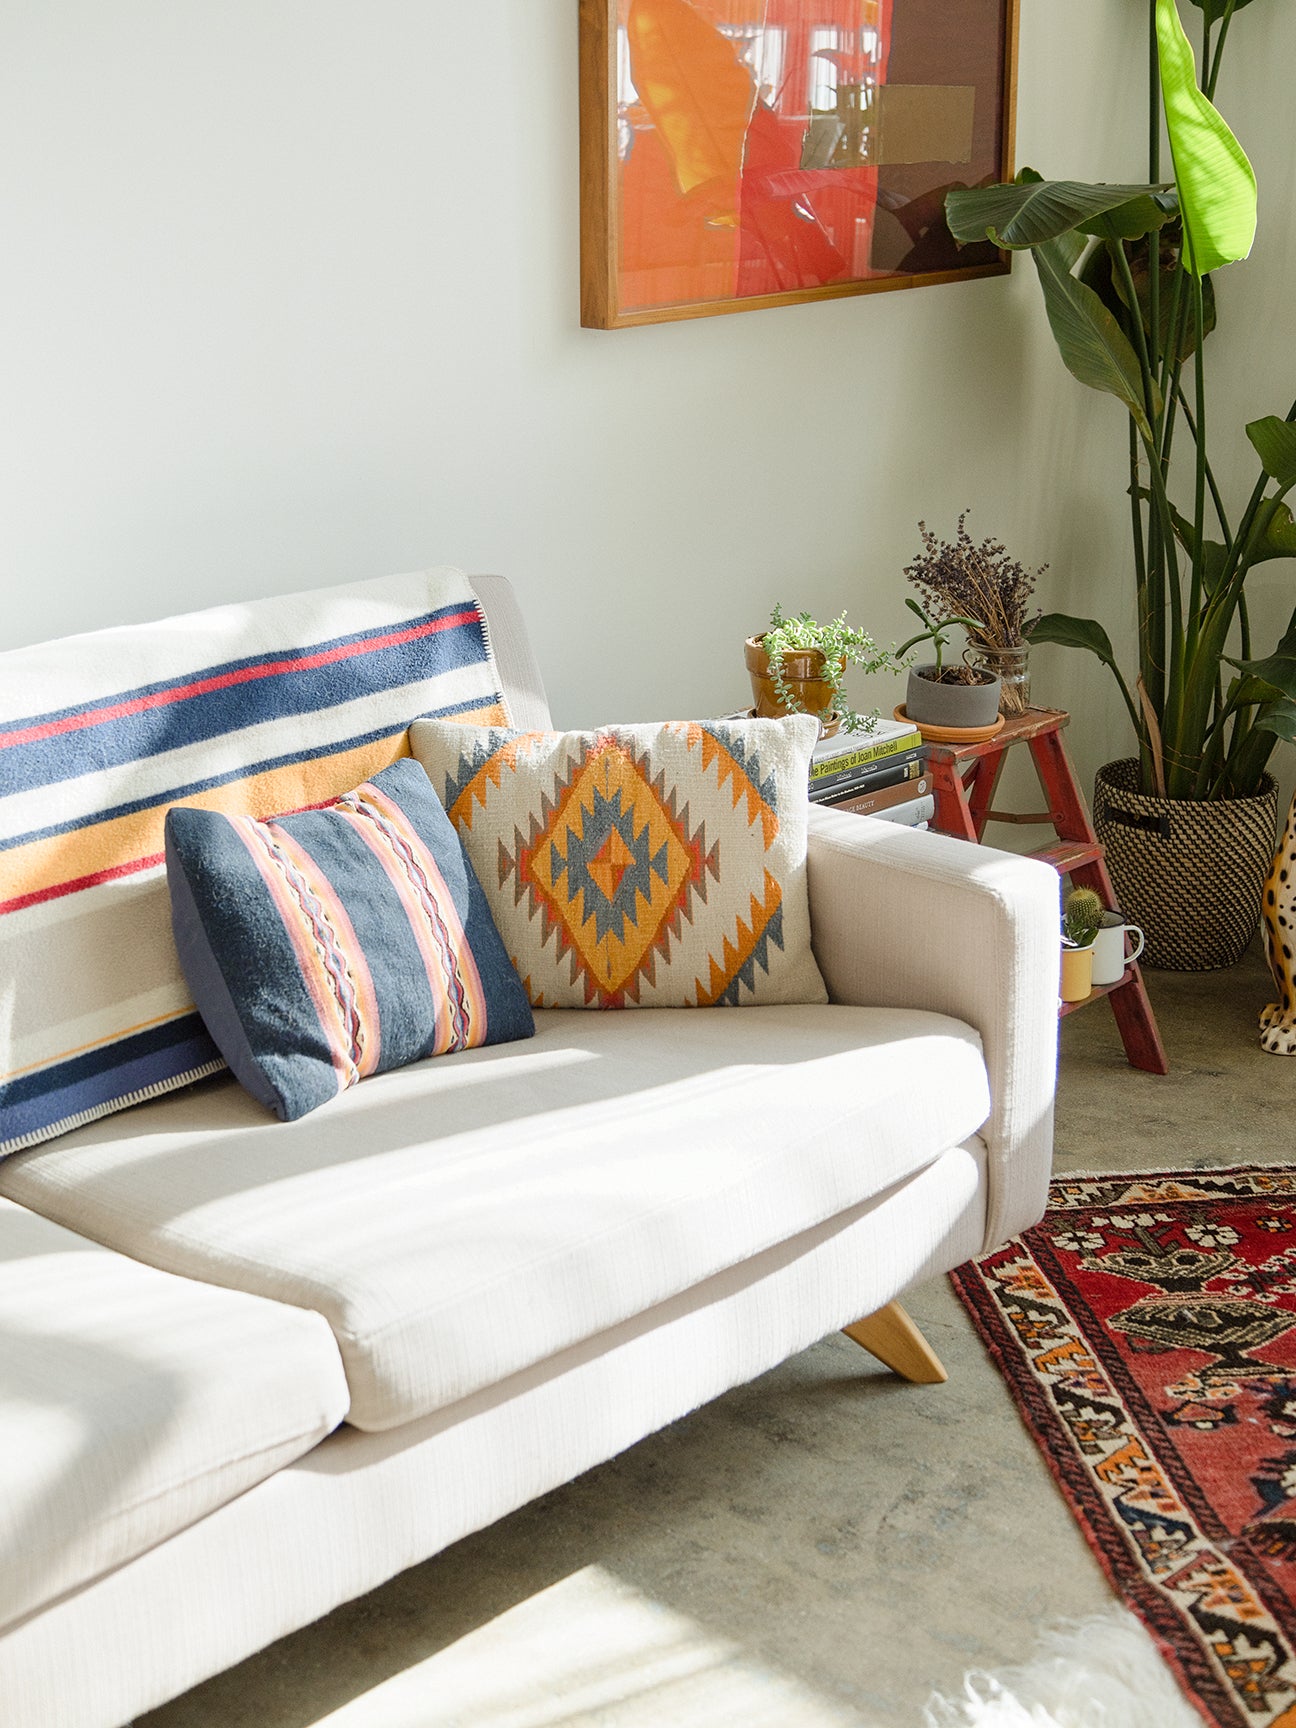 Corner of a living room with a sofa, plant, and rug